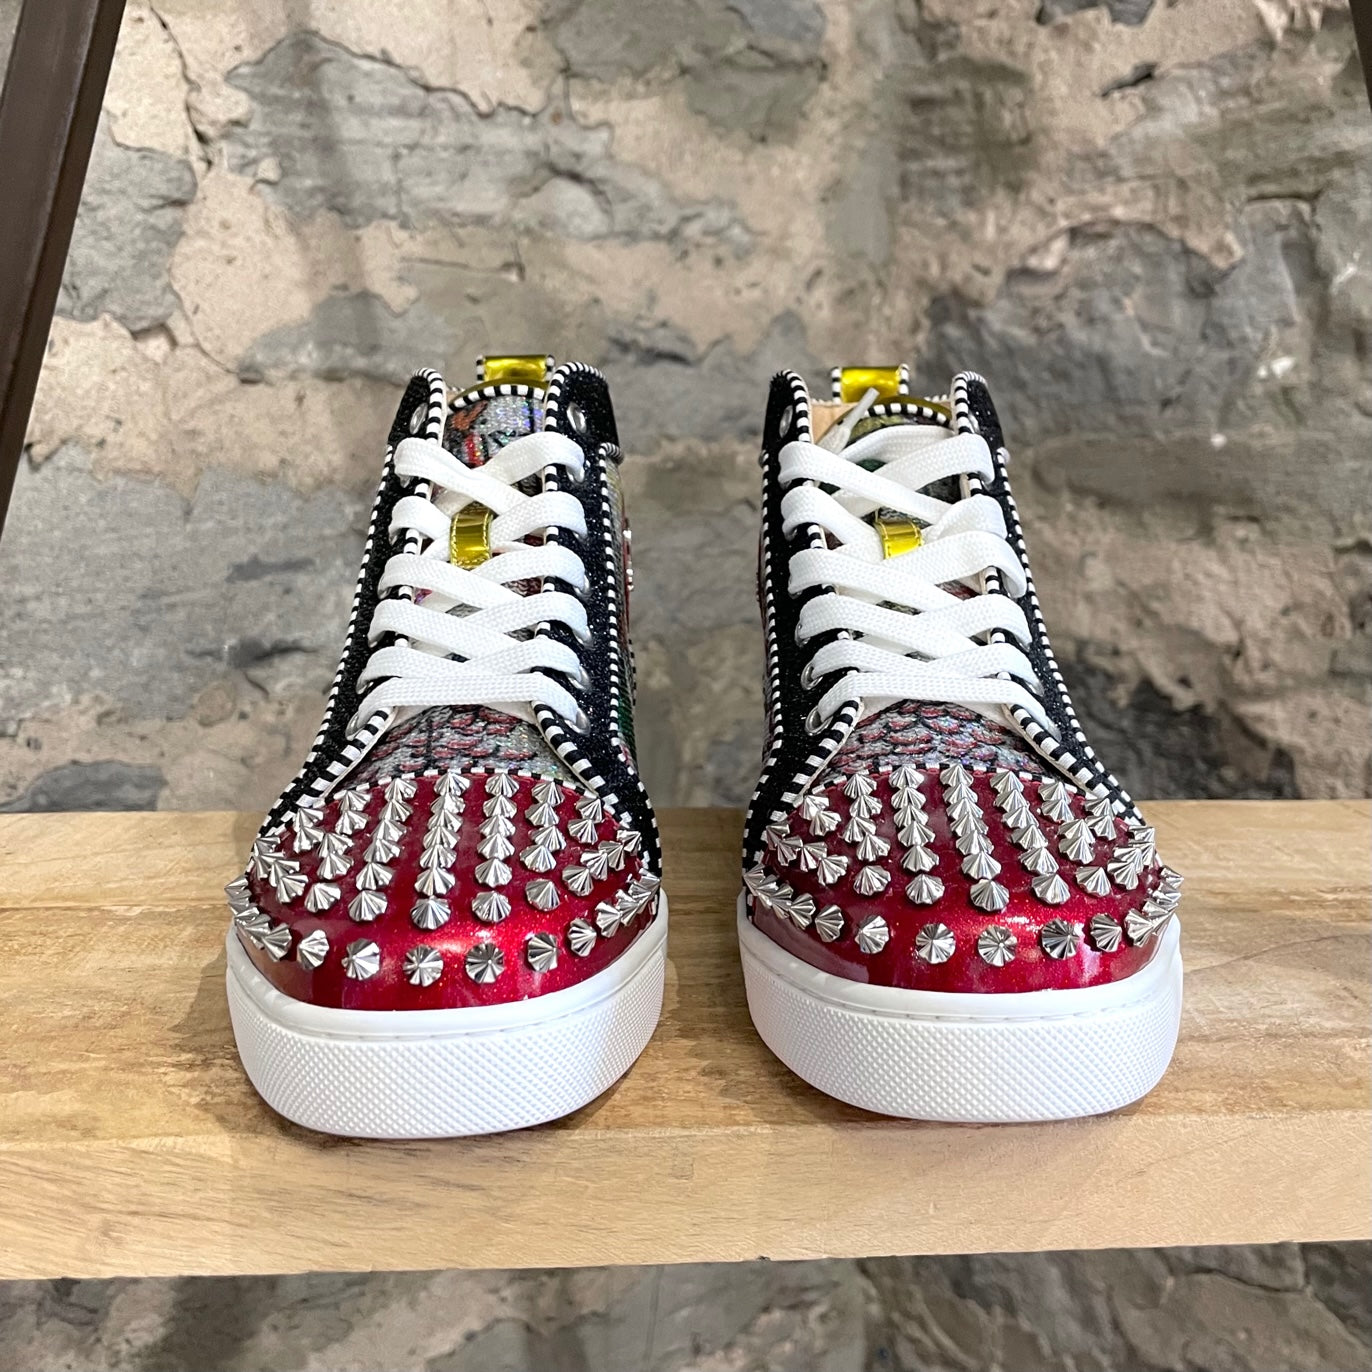 Christian Graffiti High-top Sneakers Boutique LUC.S